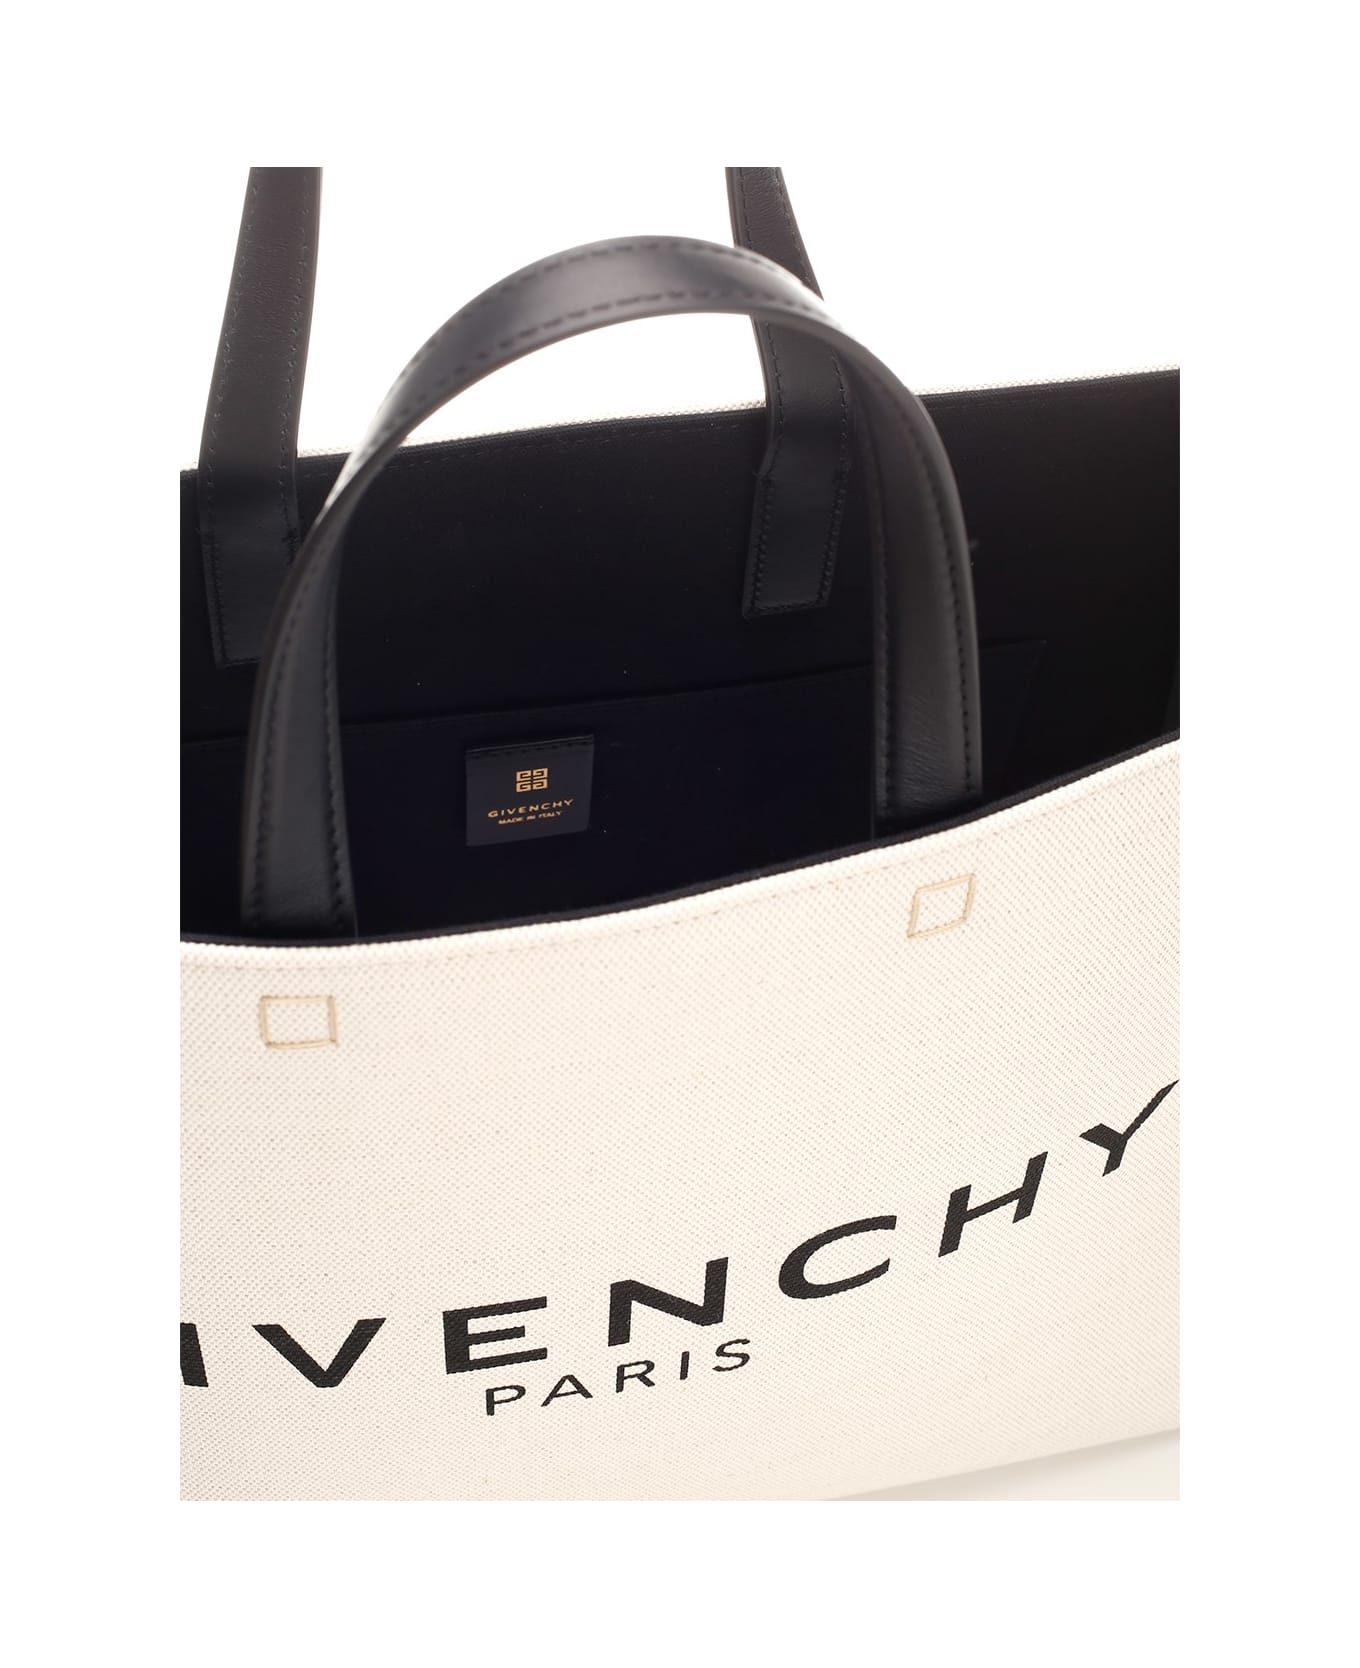 Givenchy 'g' Canvas Tote Bag - Beige トートバッグ